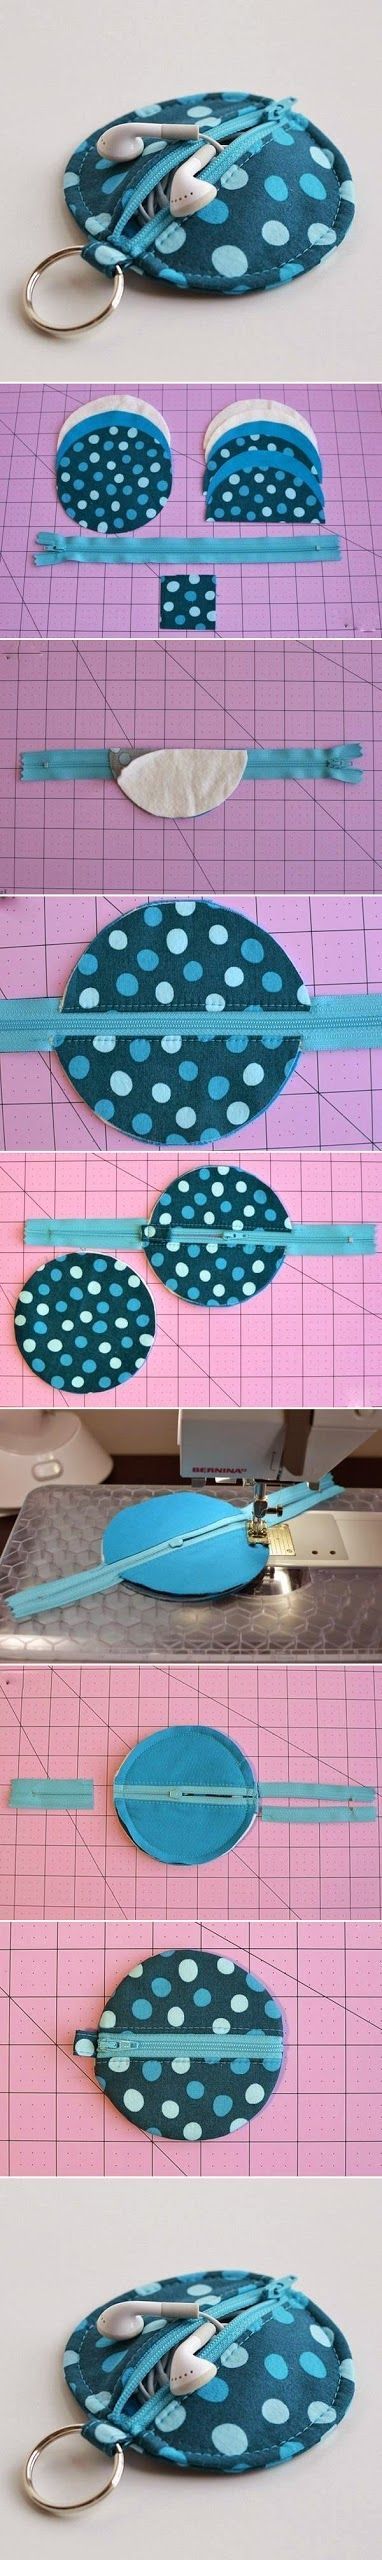 Making something like this will only take you a few minutes. All you need is the fabric, Zipper and a key ring. This project is a